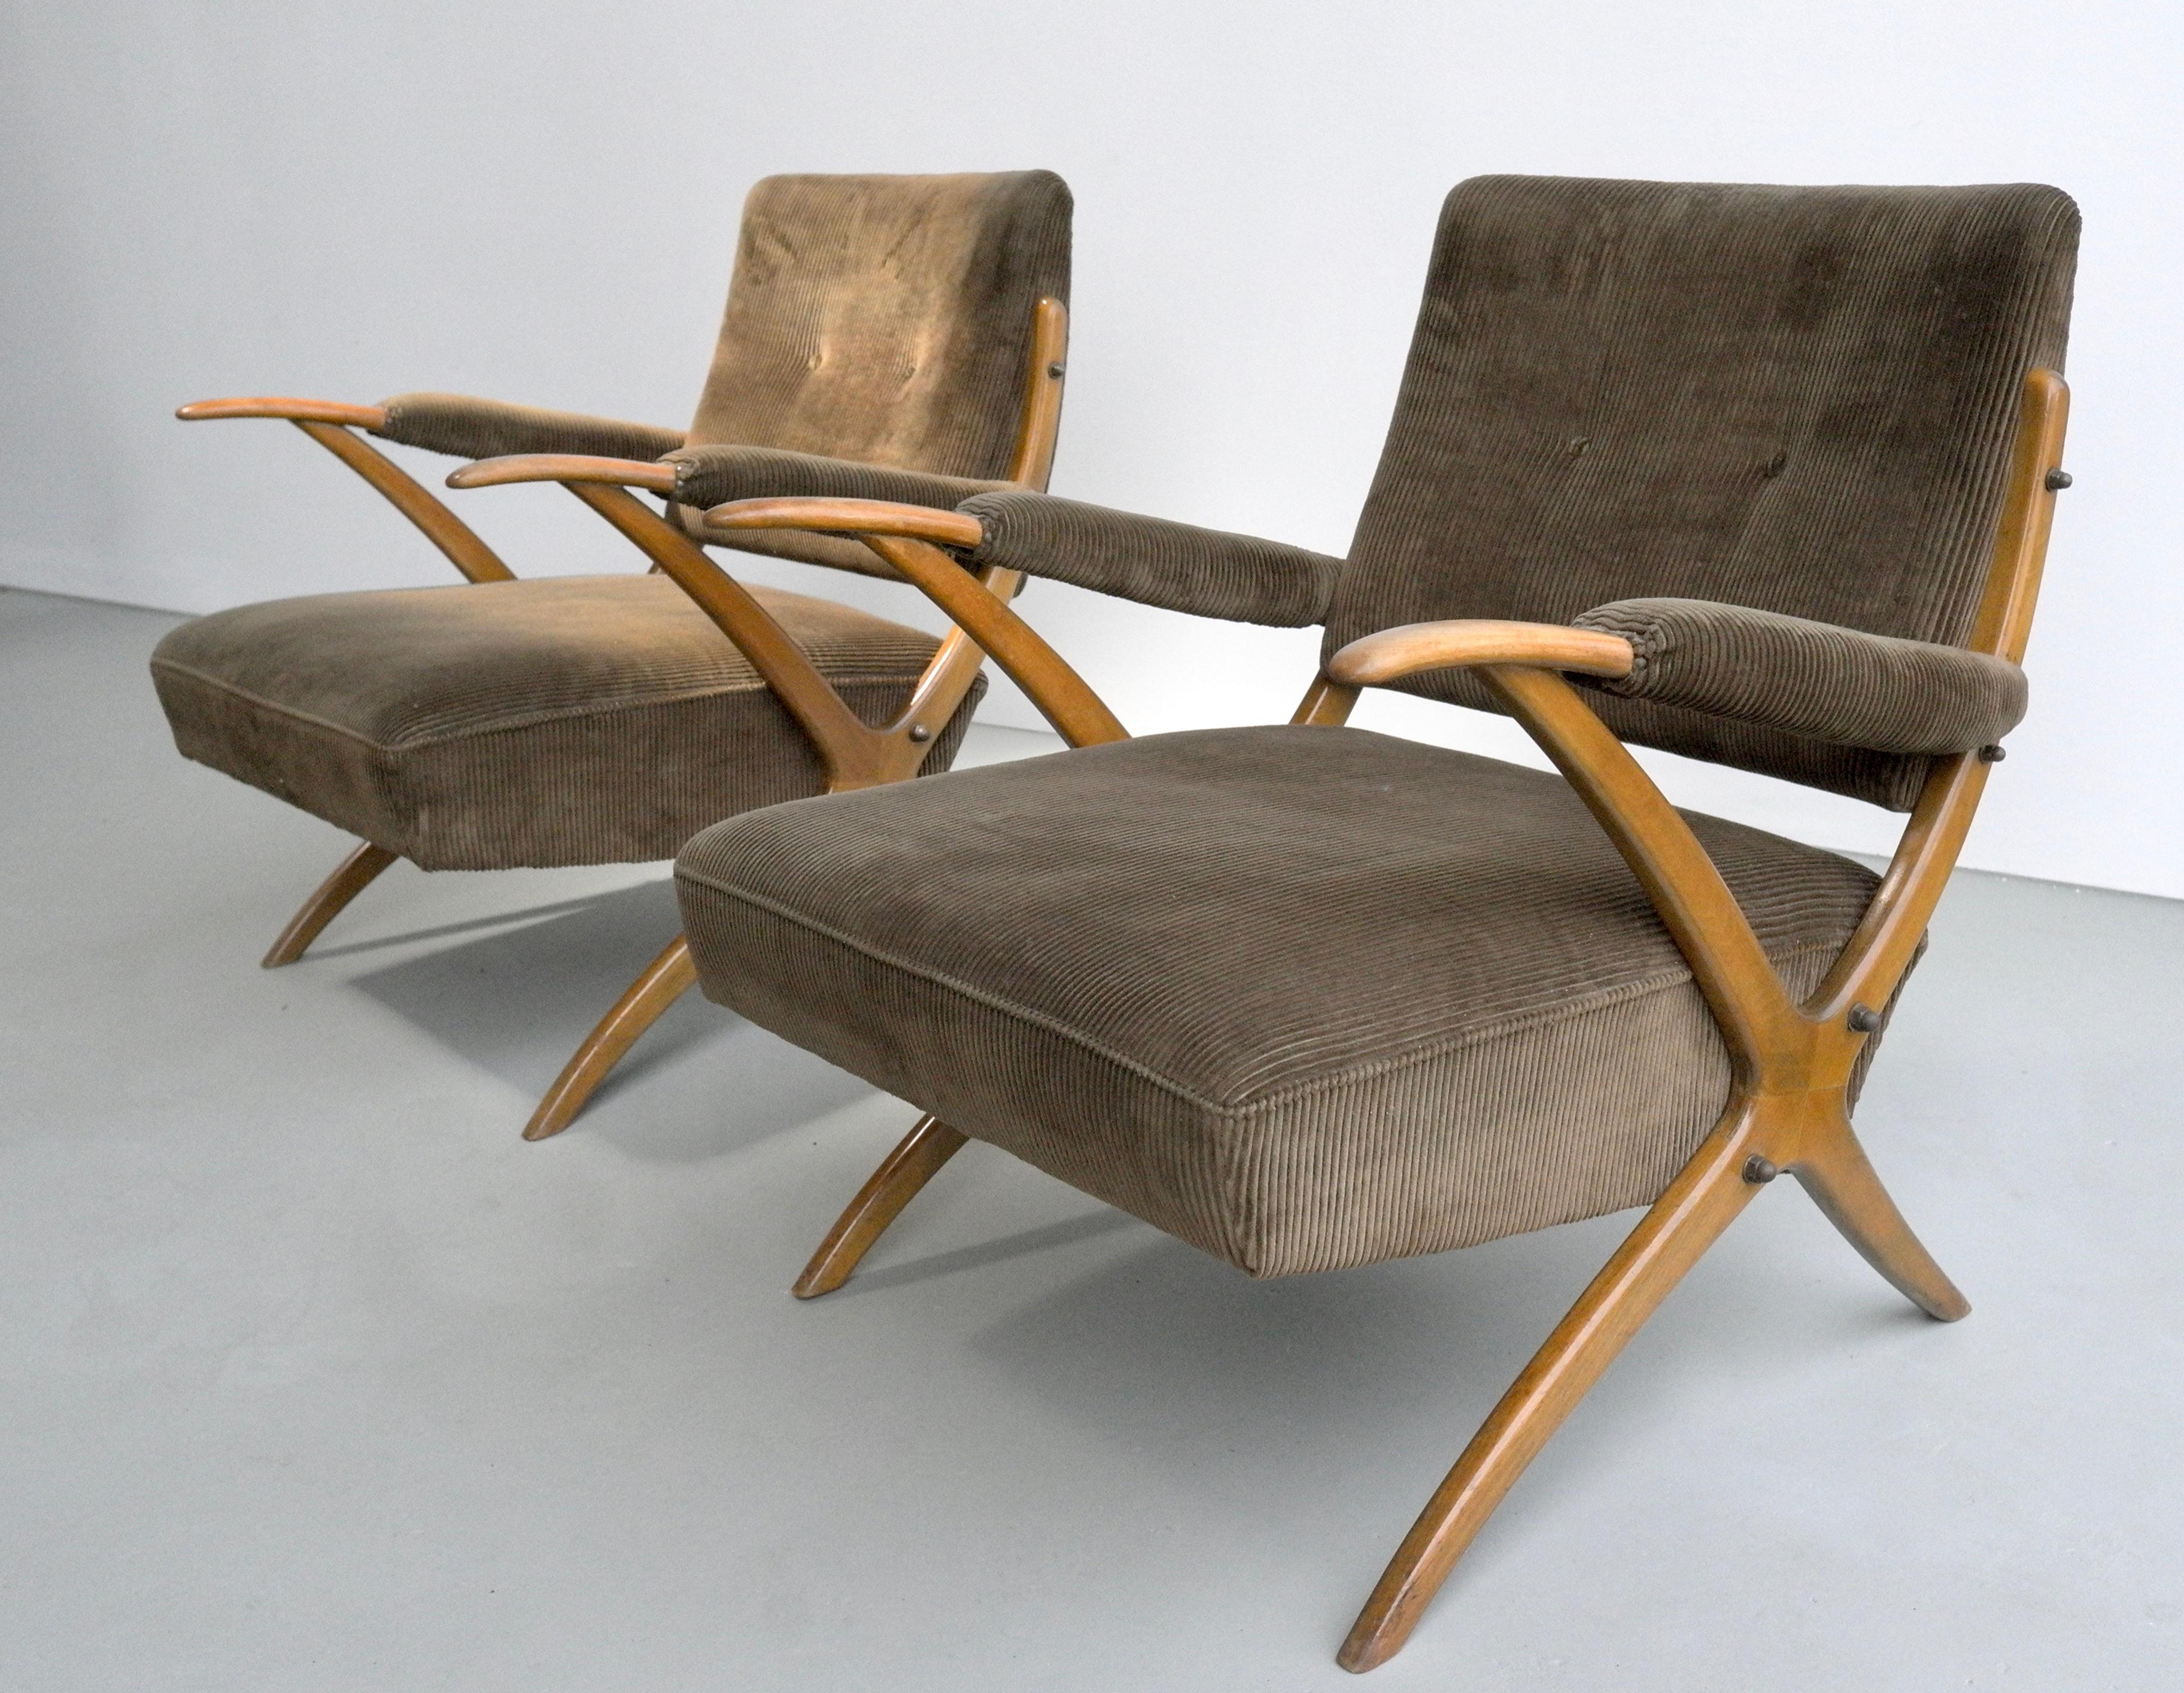 Italian Exceptional Pair of Wooden Curved Cross-Frame Lounge Chairs, Italy, 1950s